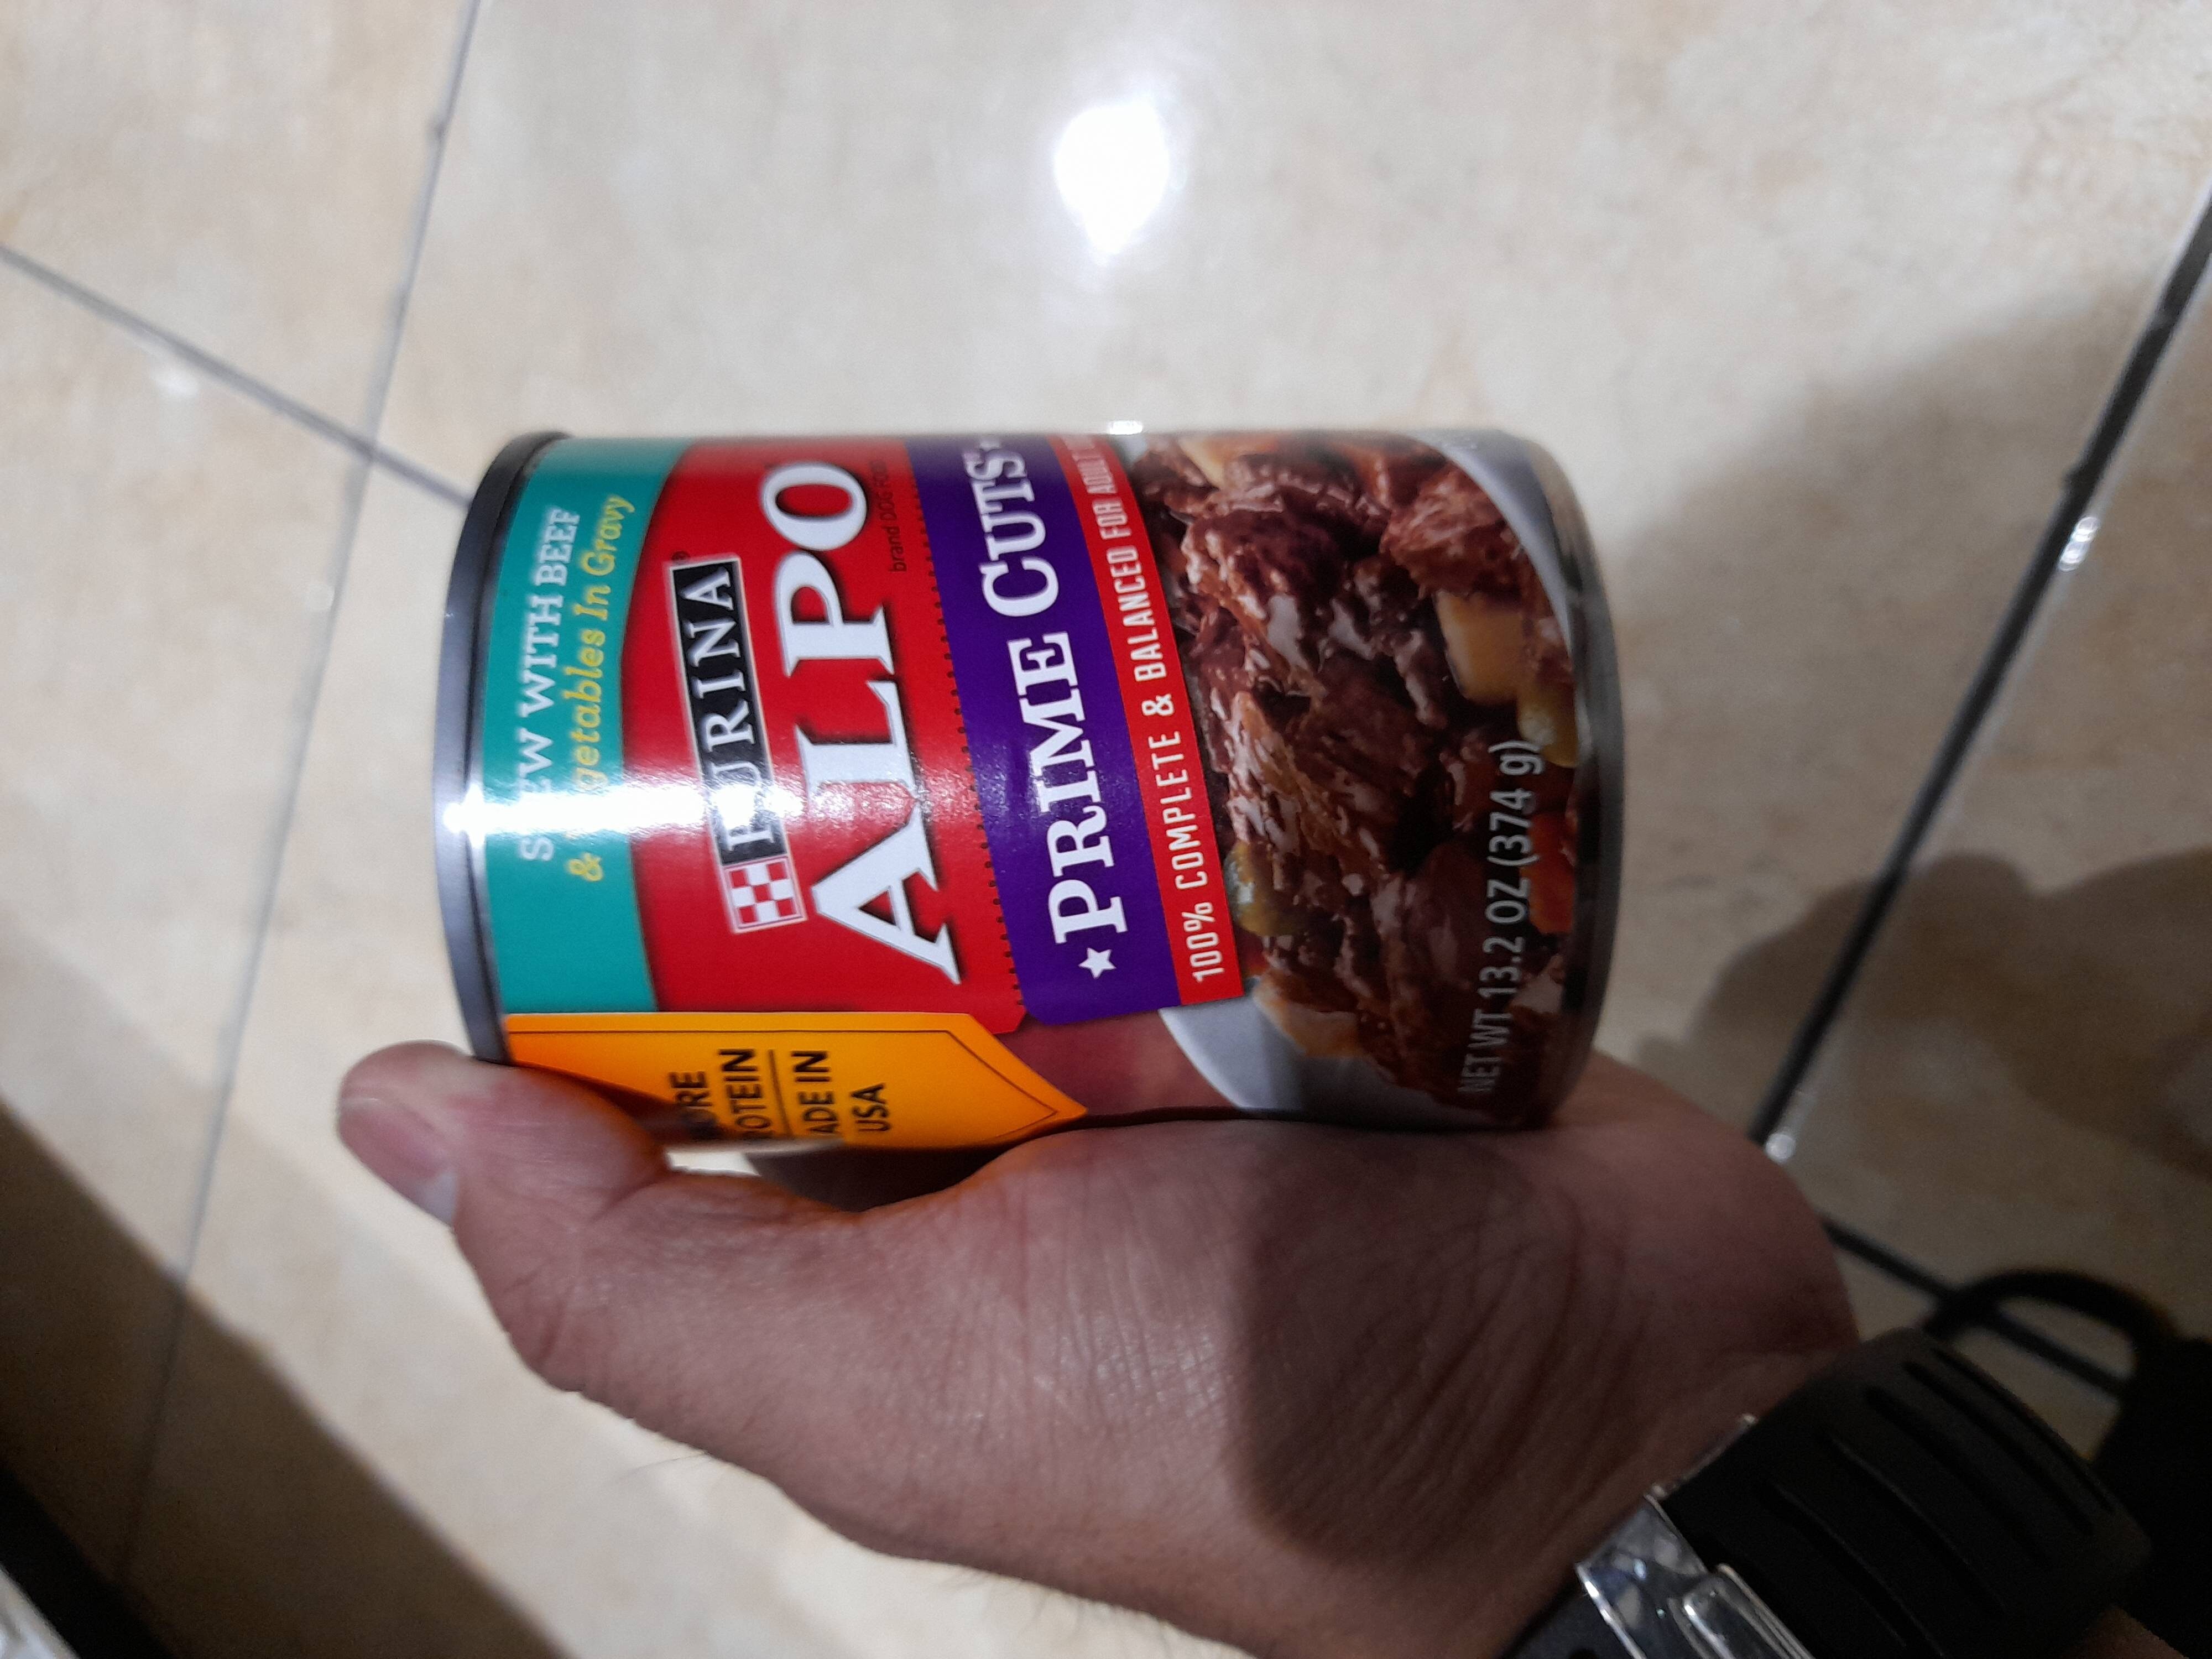 Alpo primecuts stew with beef - Product - so